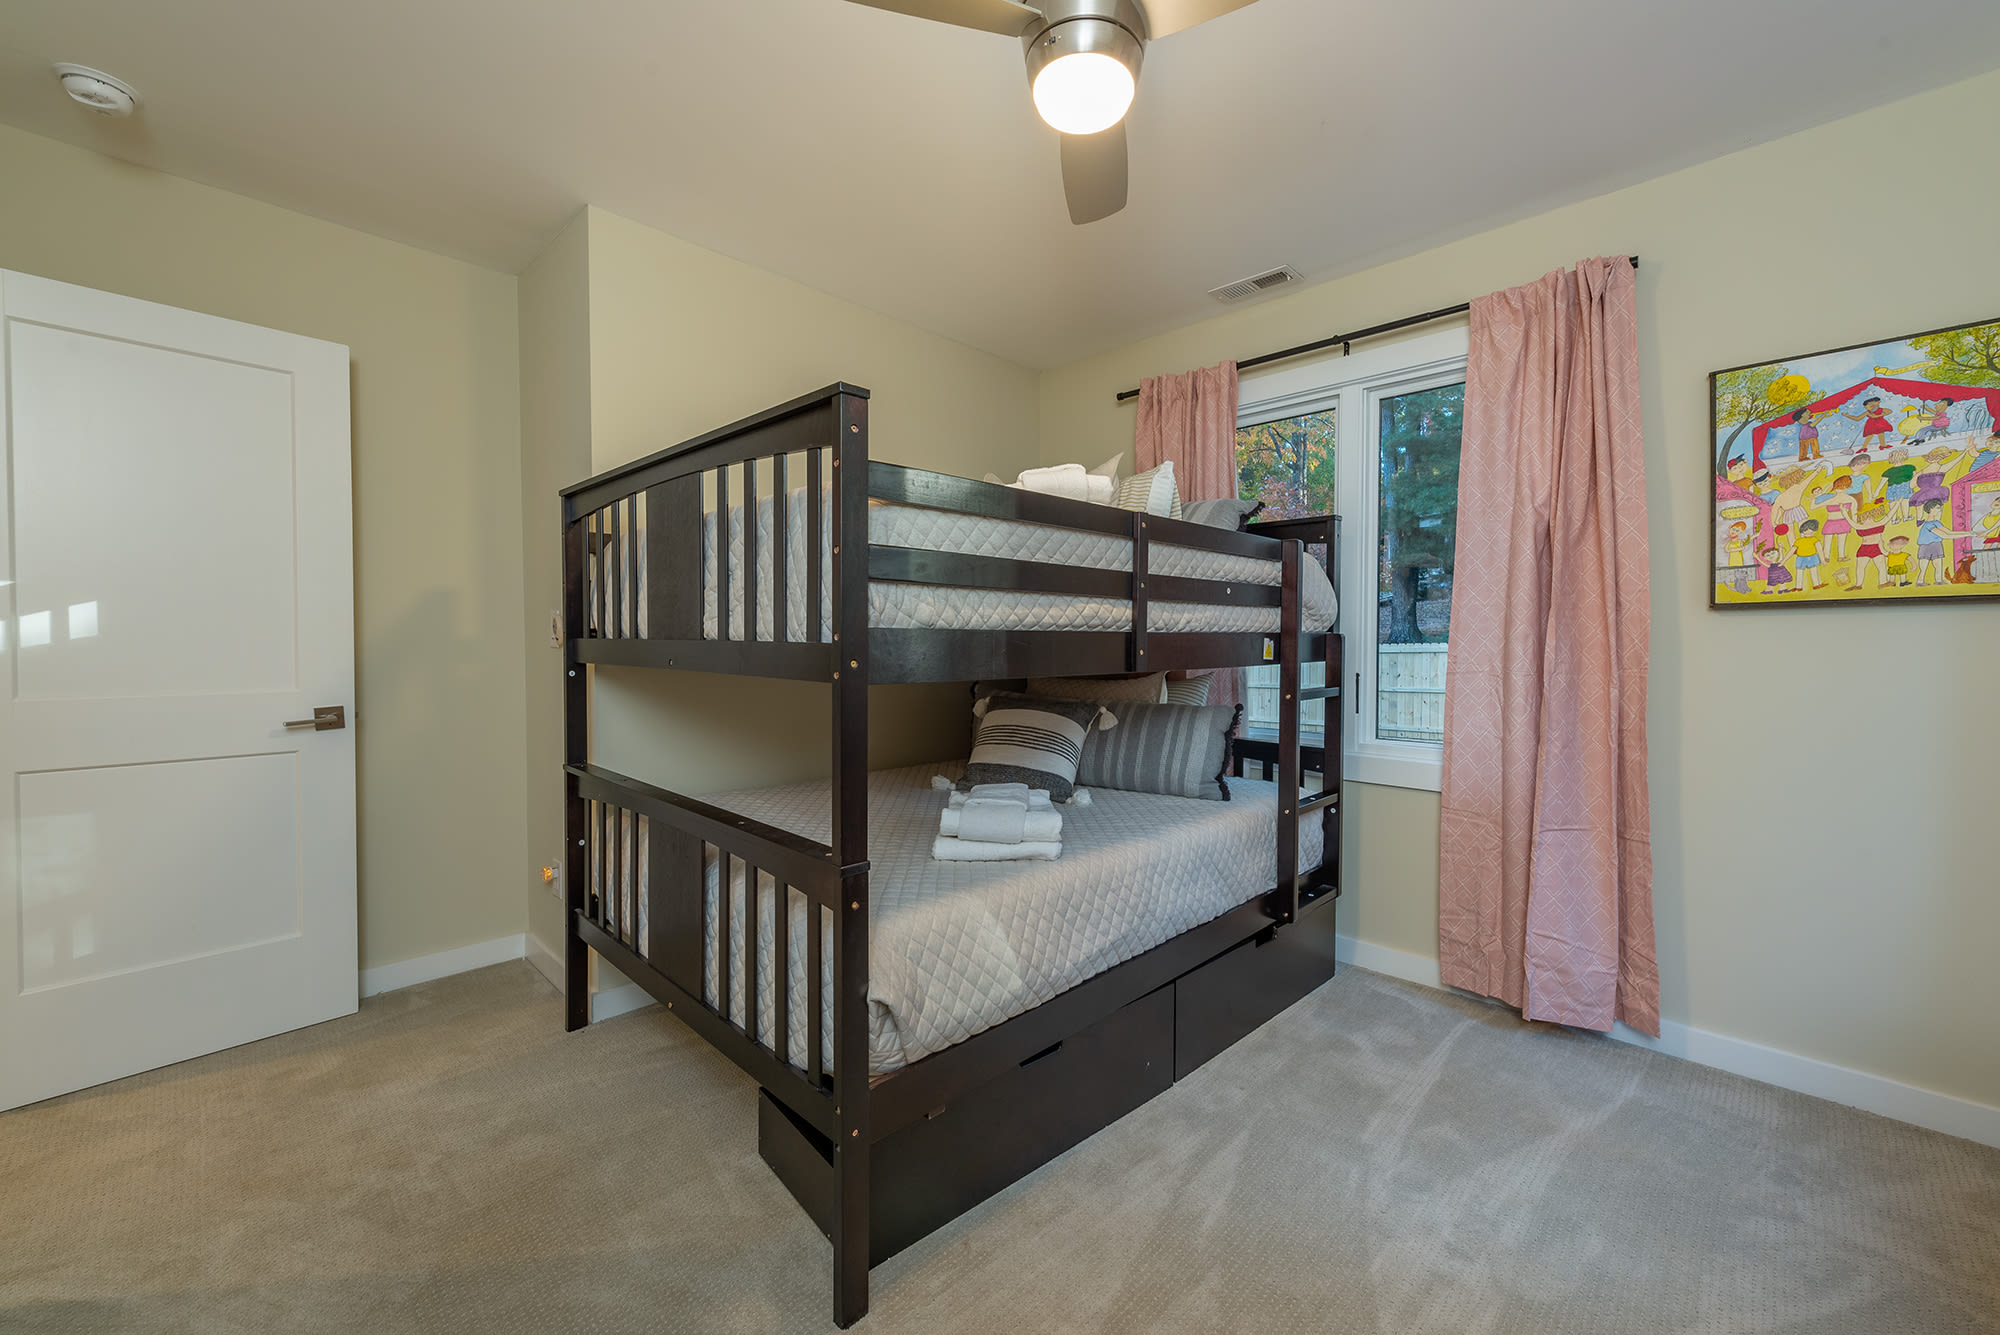 Full size bunk beds- perfect for kids